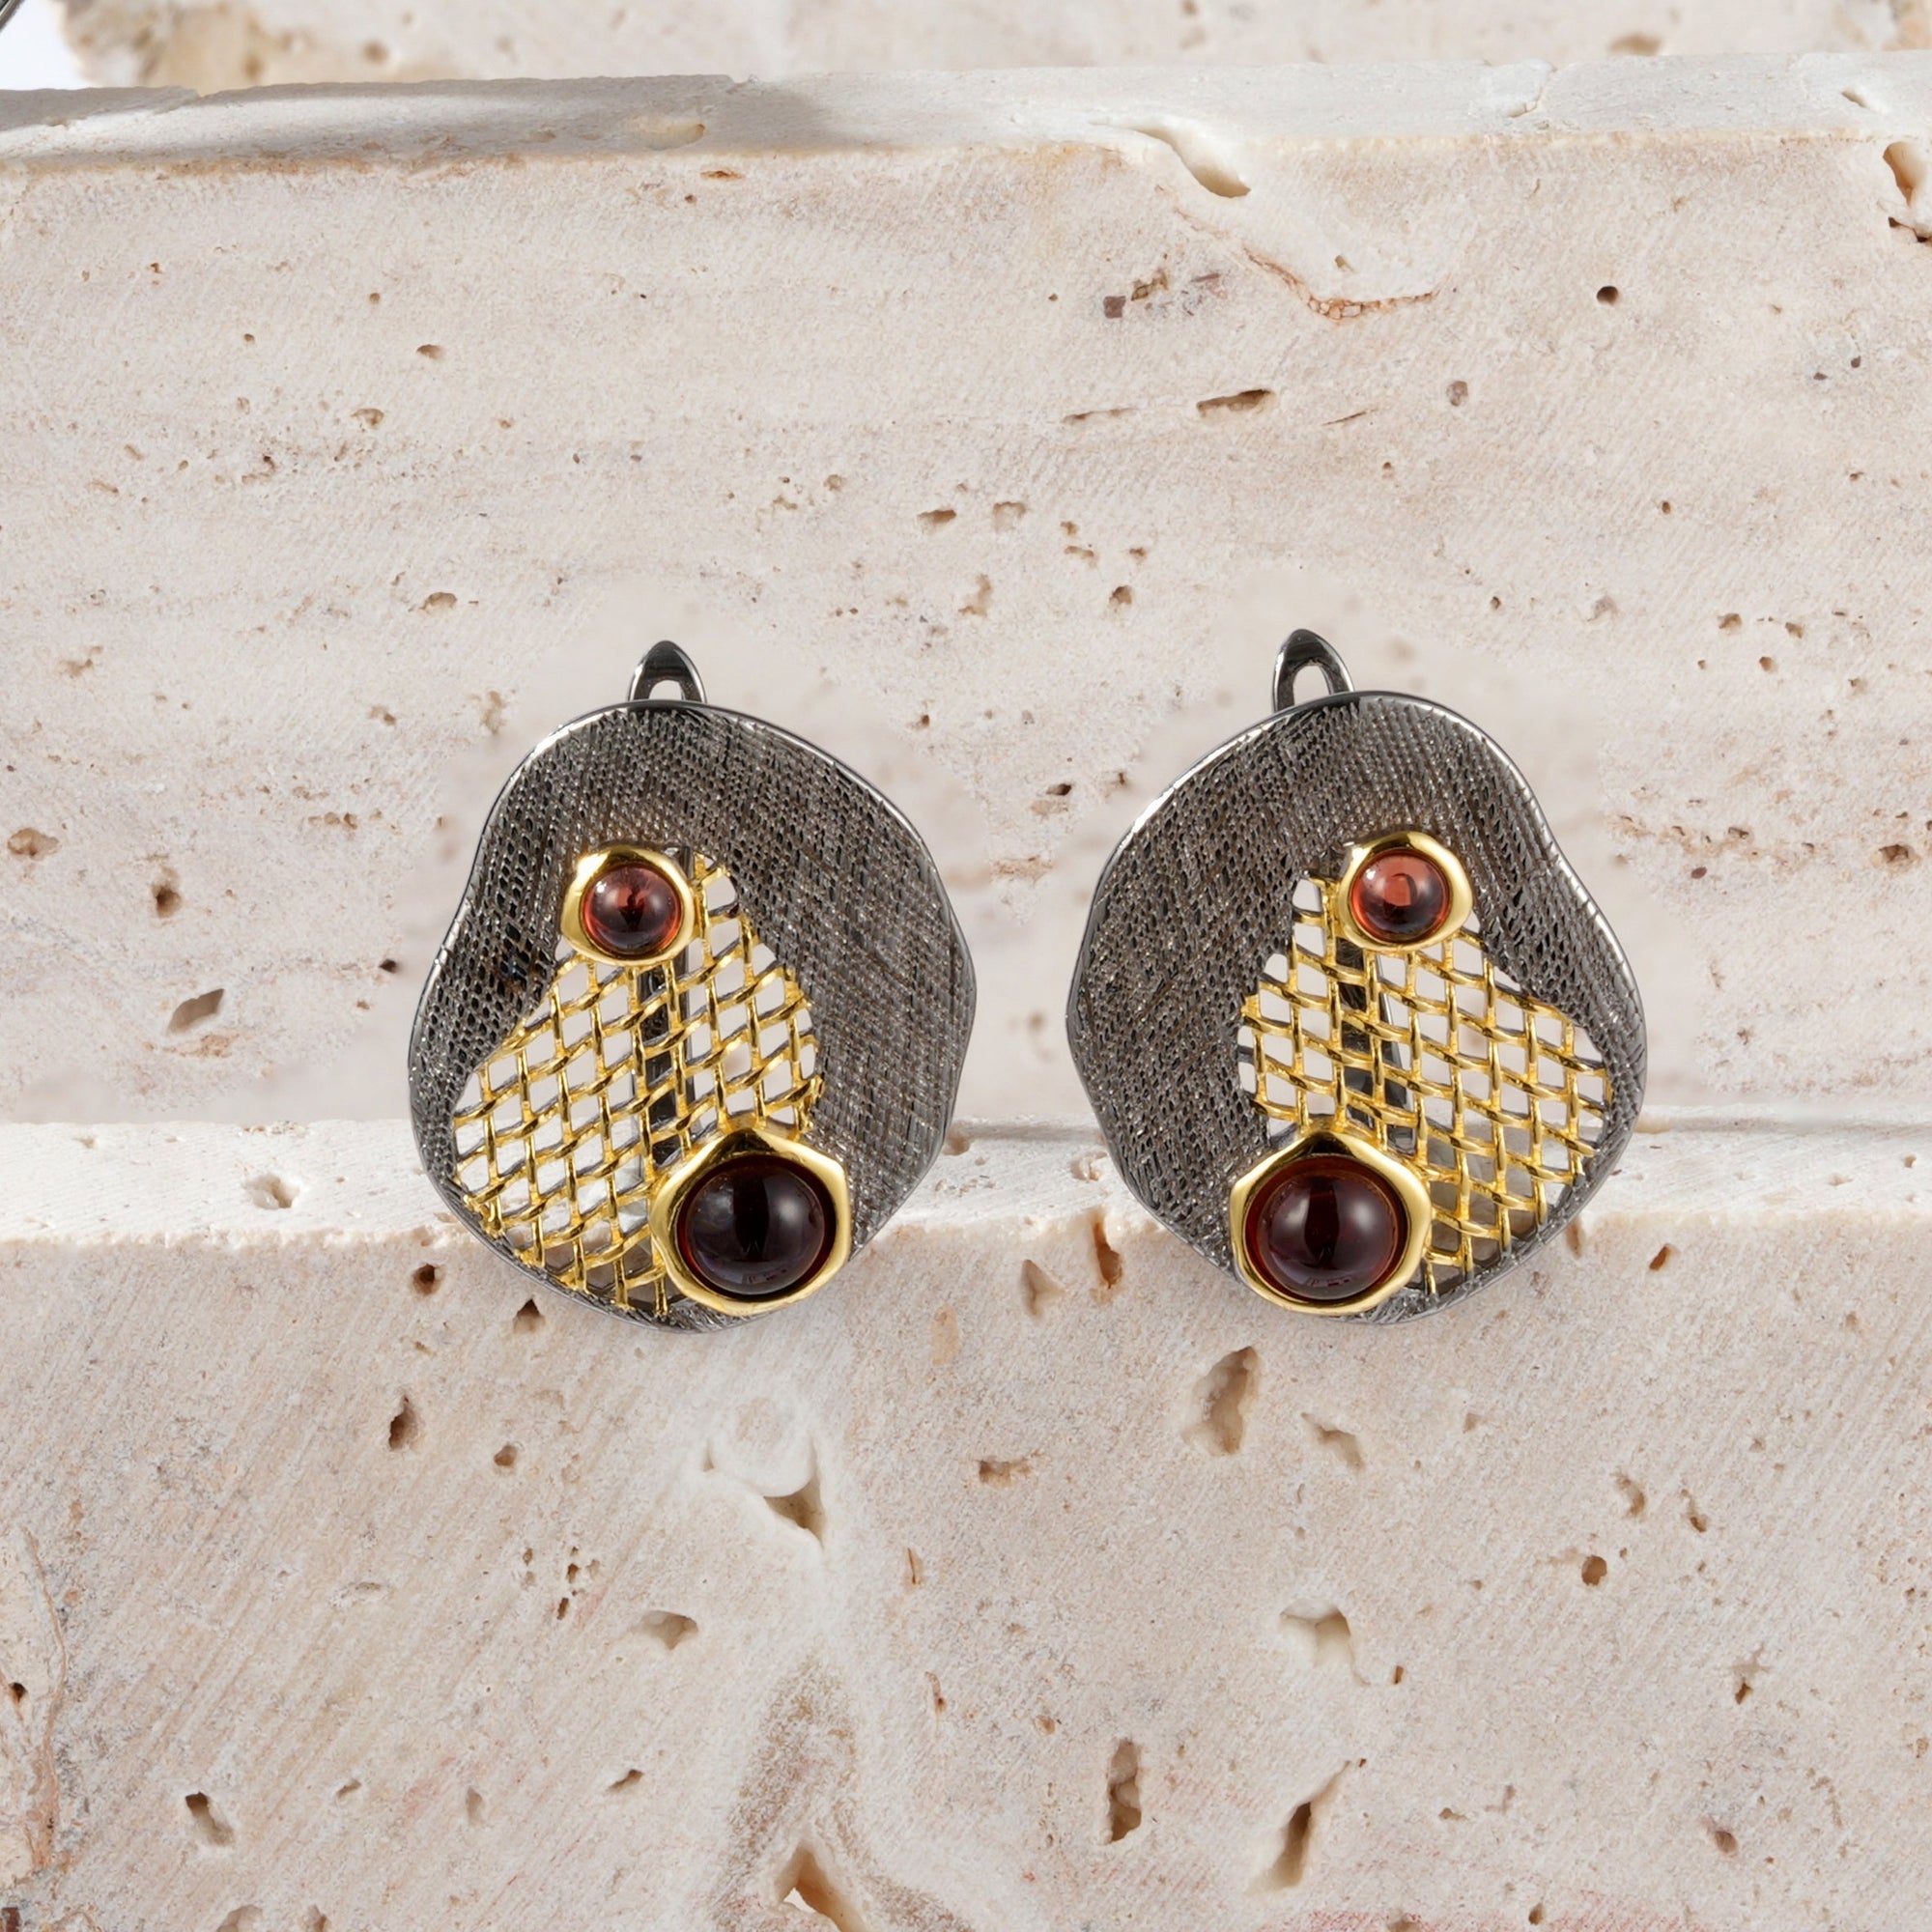 A pair of silver gold plated earrings with red garnet stones and black rhodium.